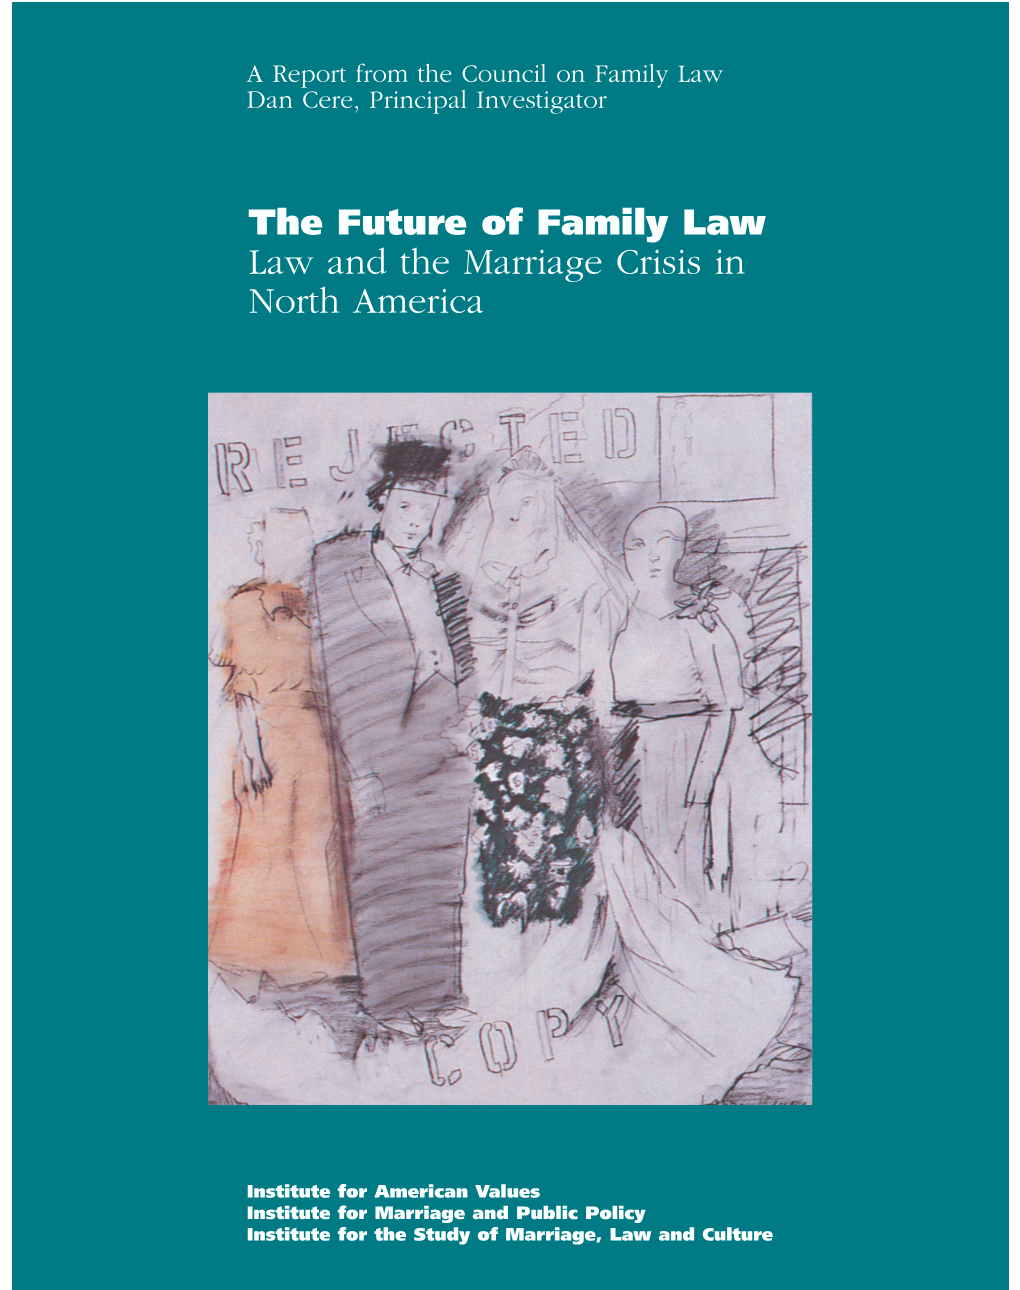 The Future of Family Law Law and the Marriage Crisis in North America